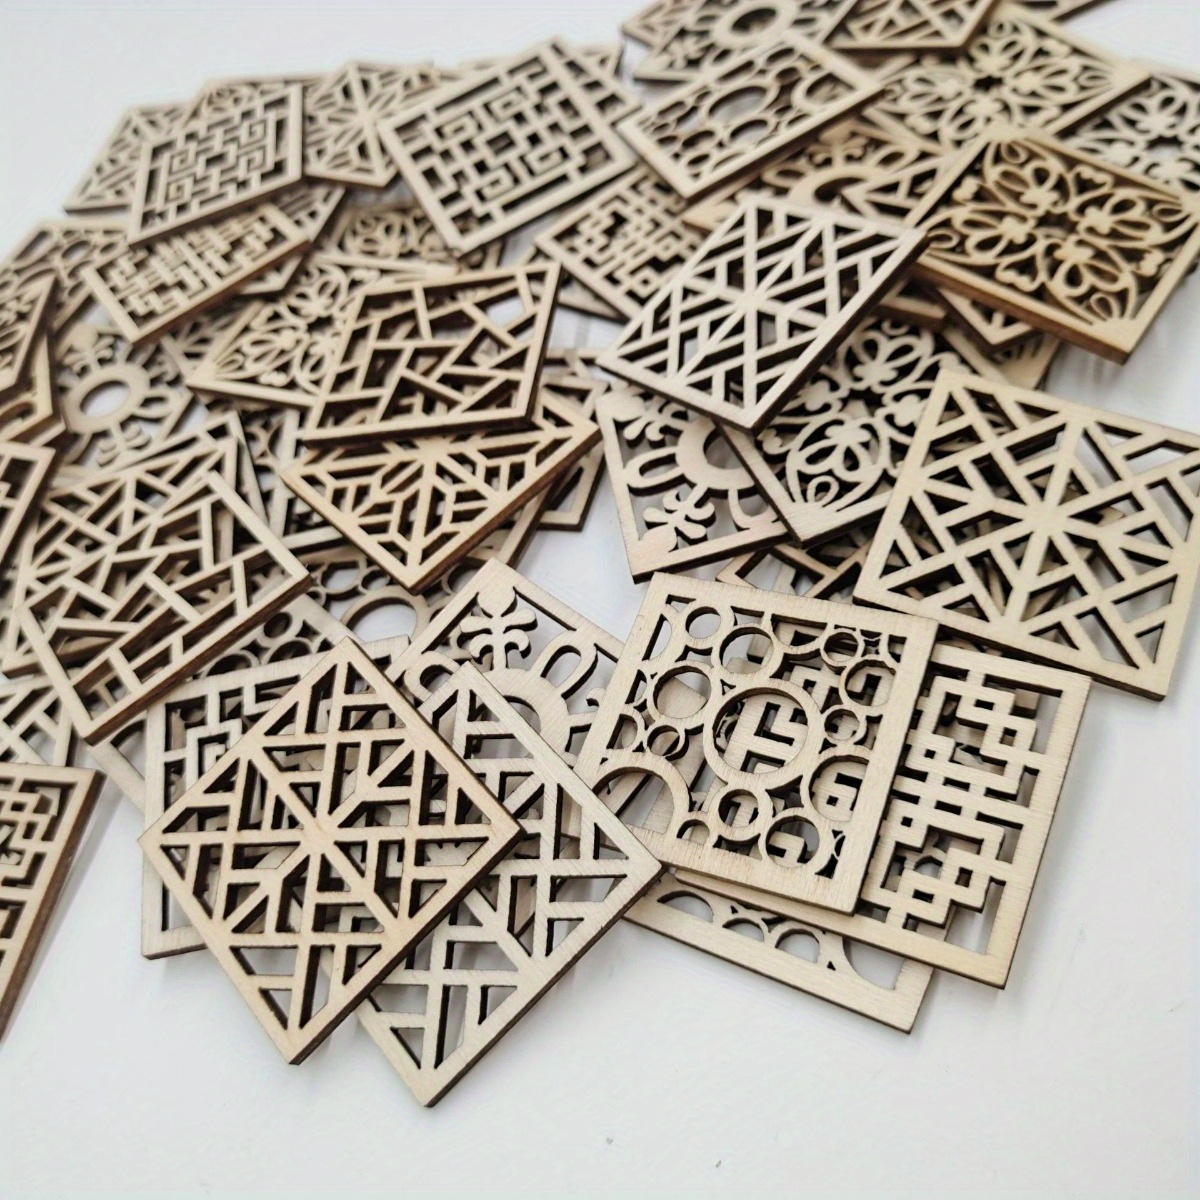 

50pcs Unpainted Wooden Carved Decal Craft For Furniture Home Decor - Wood Carving Accents For Dresser, Bed, Door, Cabinet, Wardrobe, Ceiling Decoration